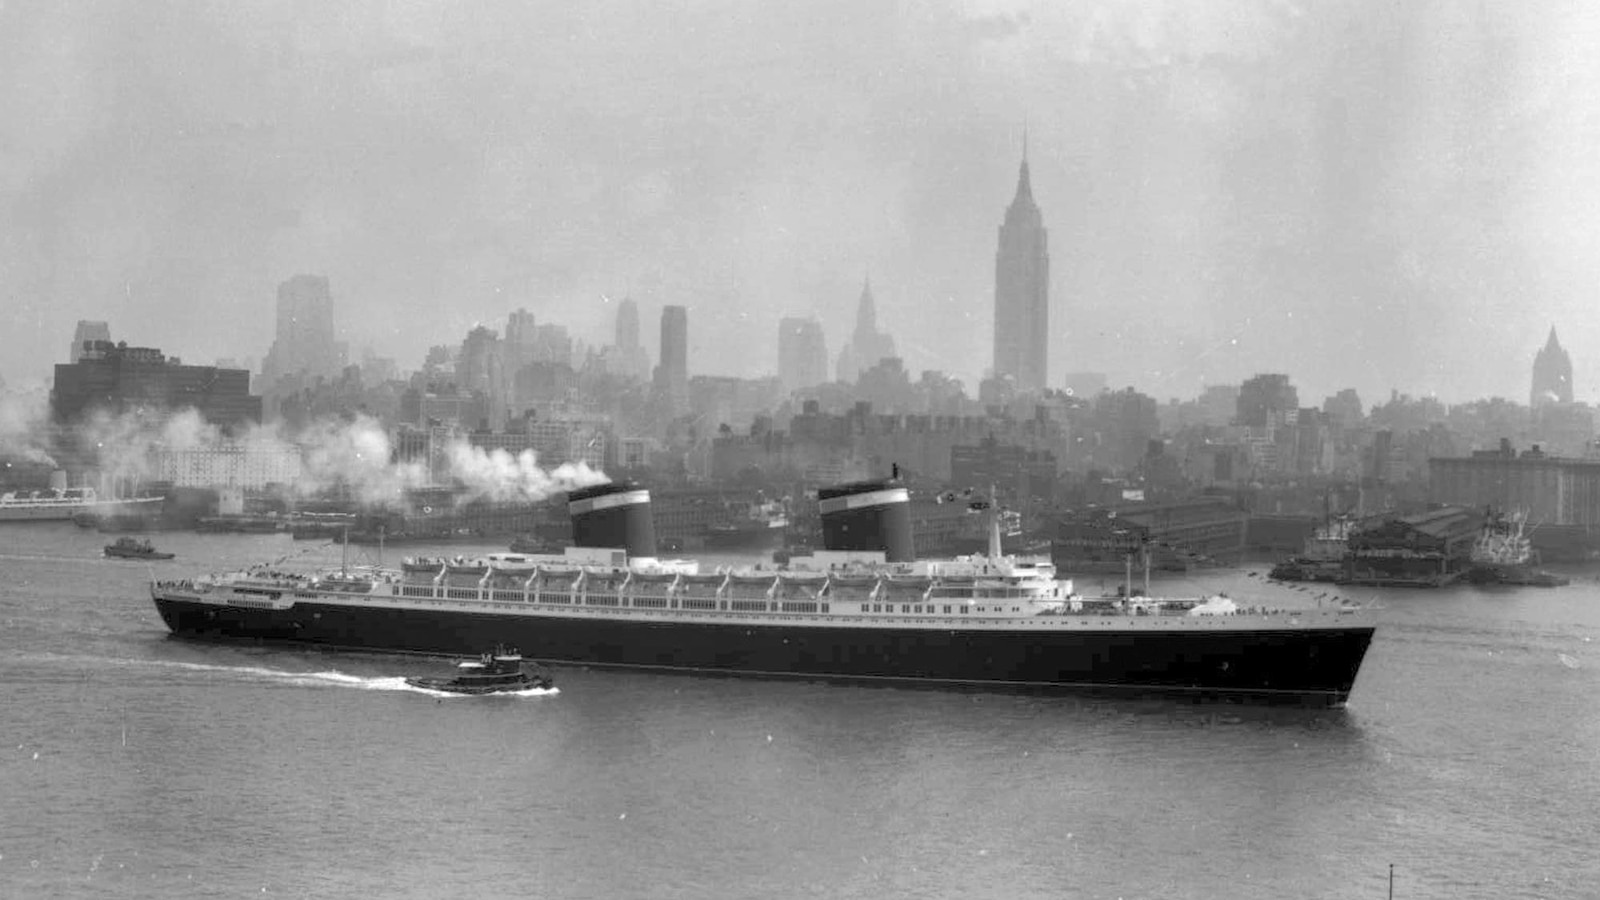 The SS United States, a historic ship, is being forced to leave its berth in Philadelphia. Will it be able to find a new home?